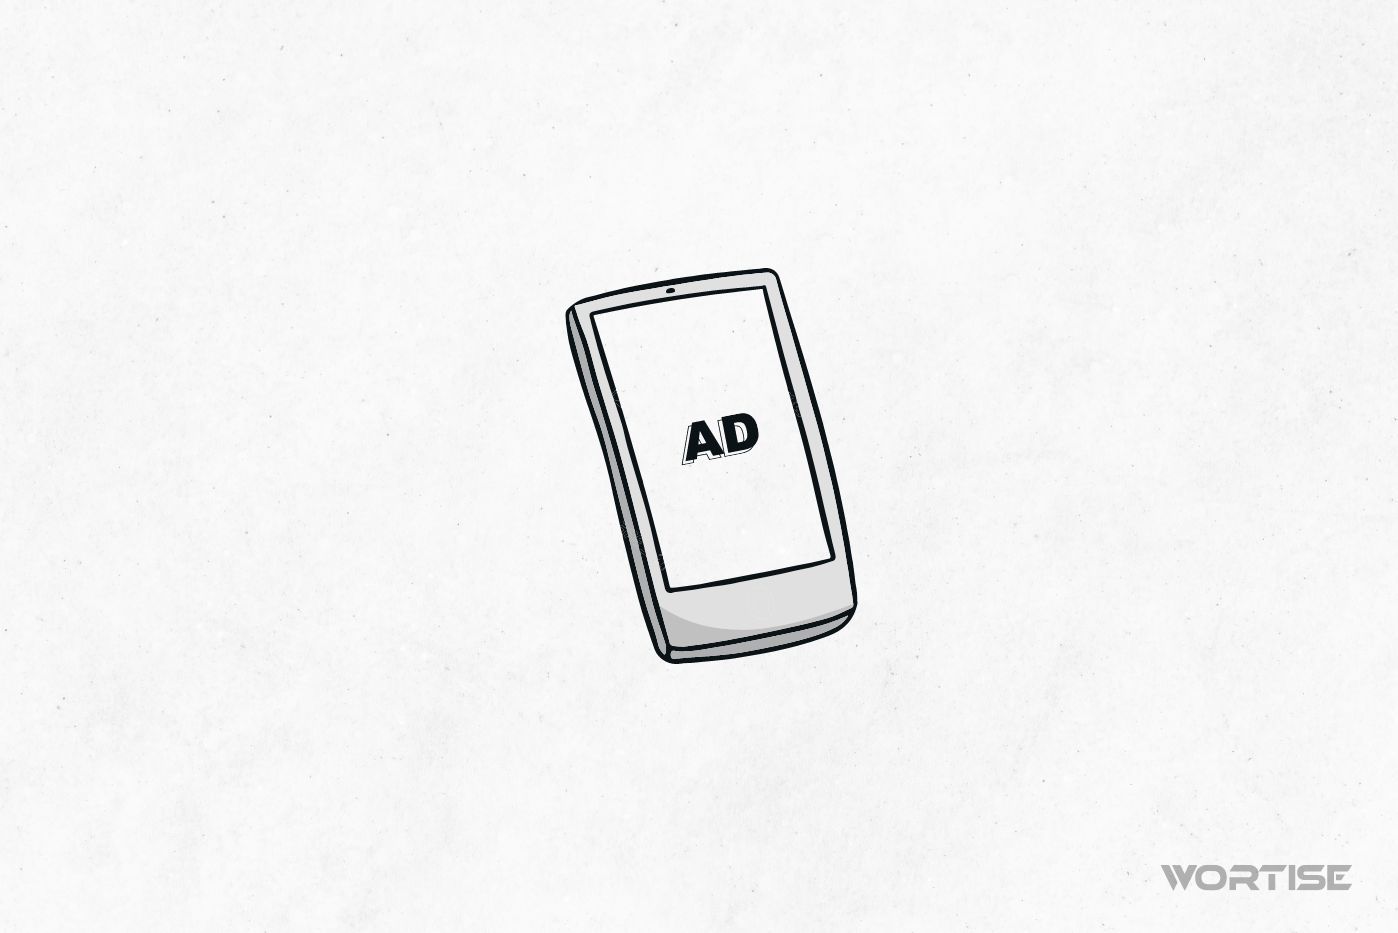 Display Ads: 10 Practices to Increase Their Visibility and Performance